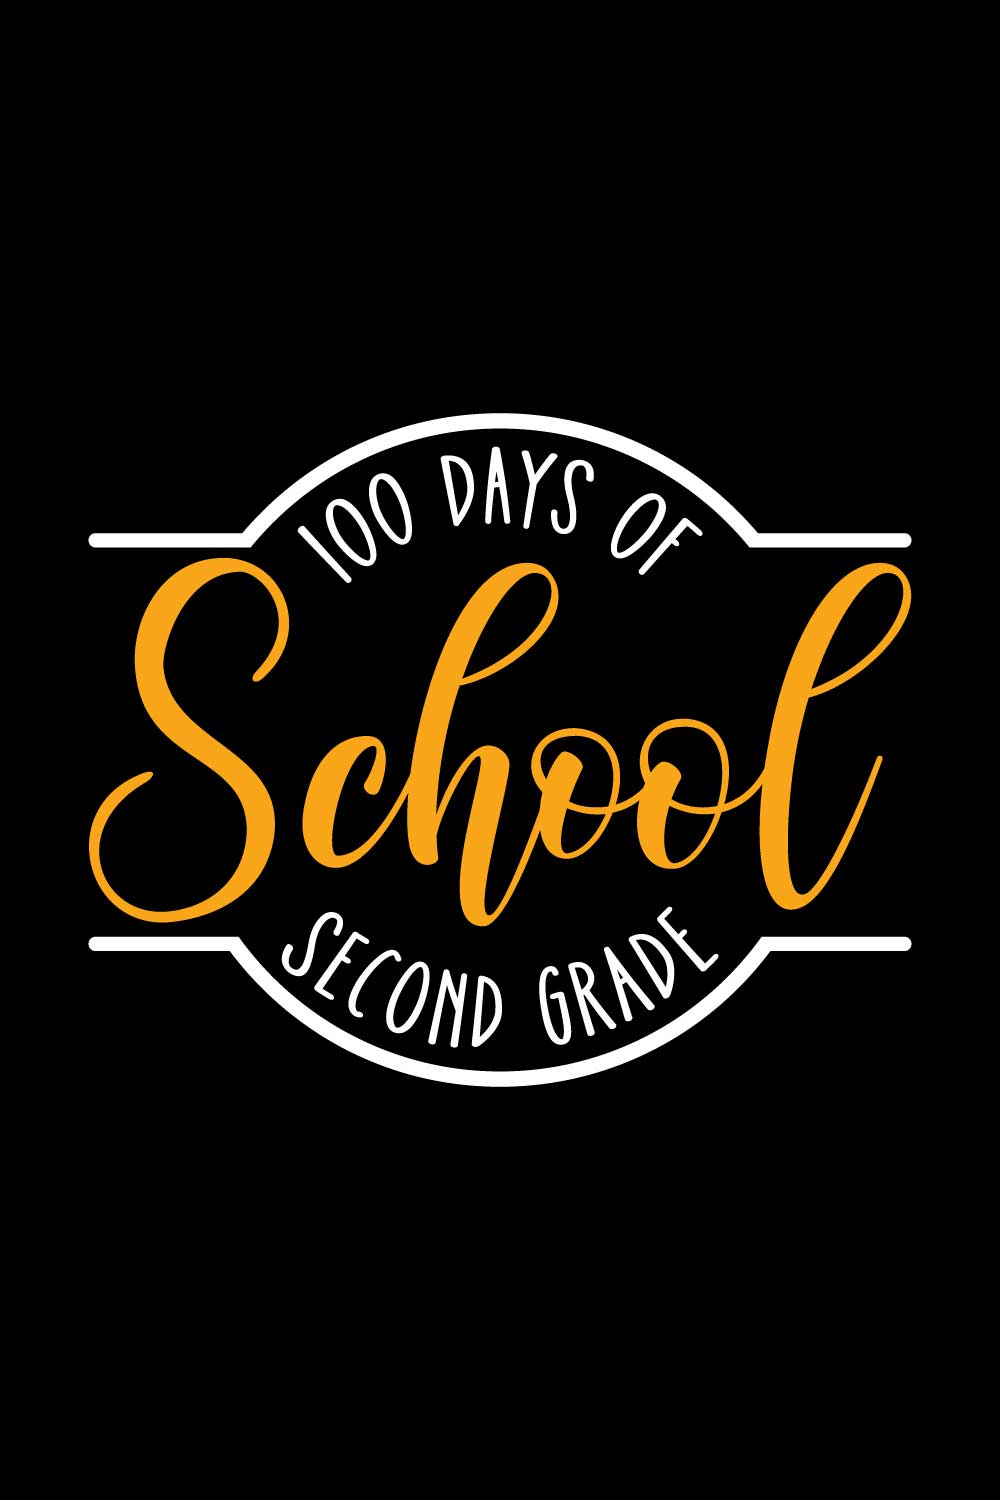 100 days of school T-Shirts design pinterest preview image.